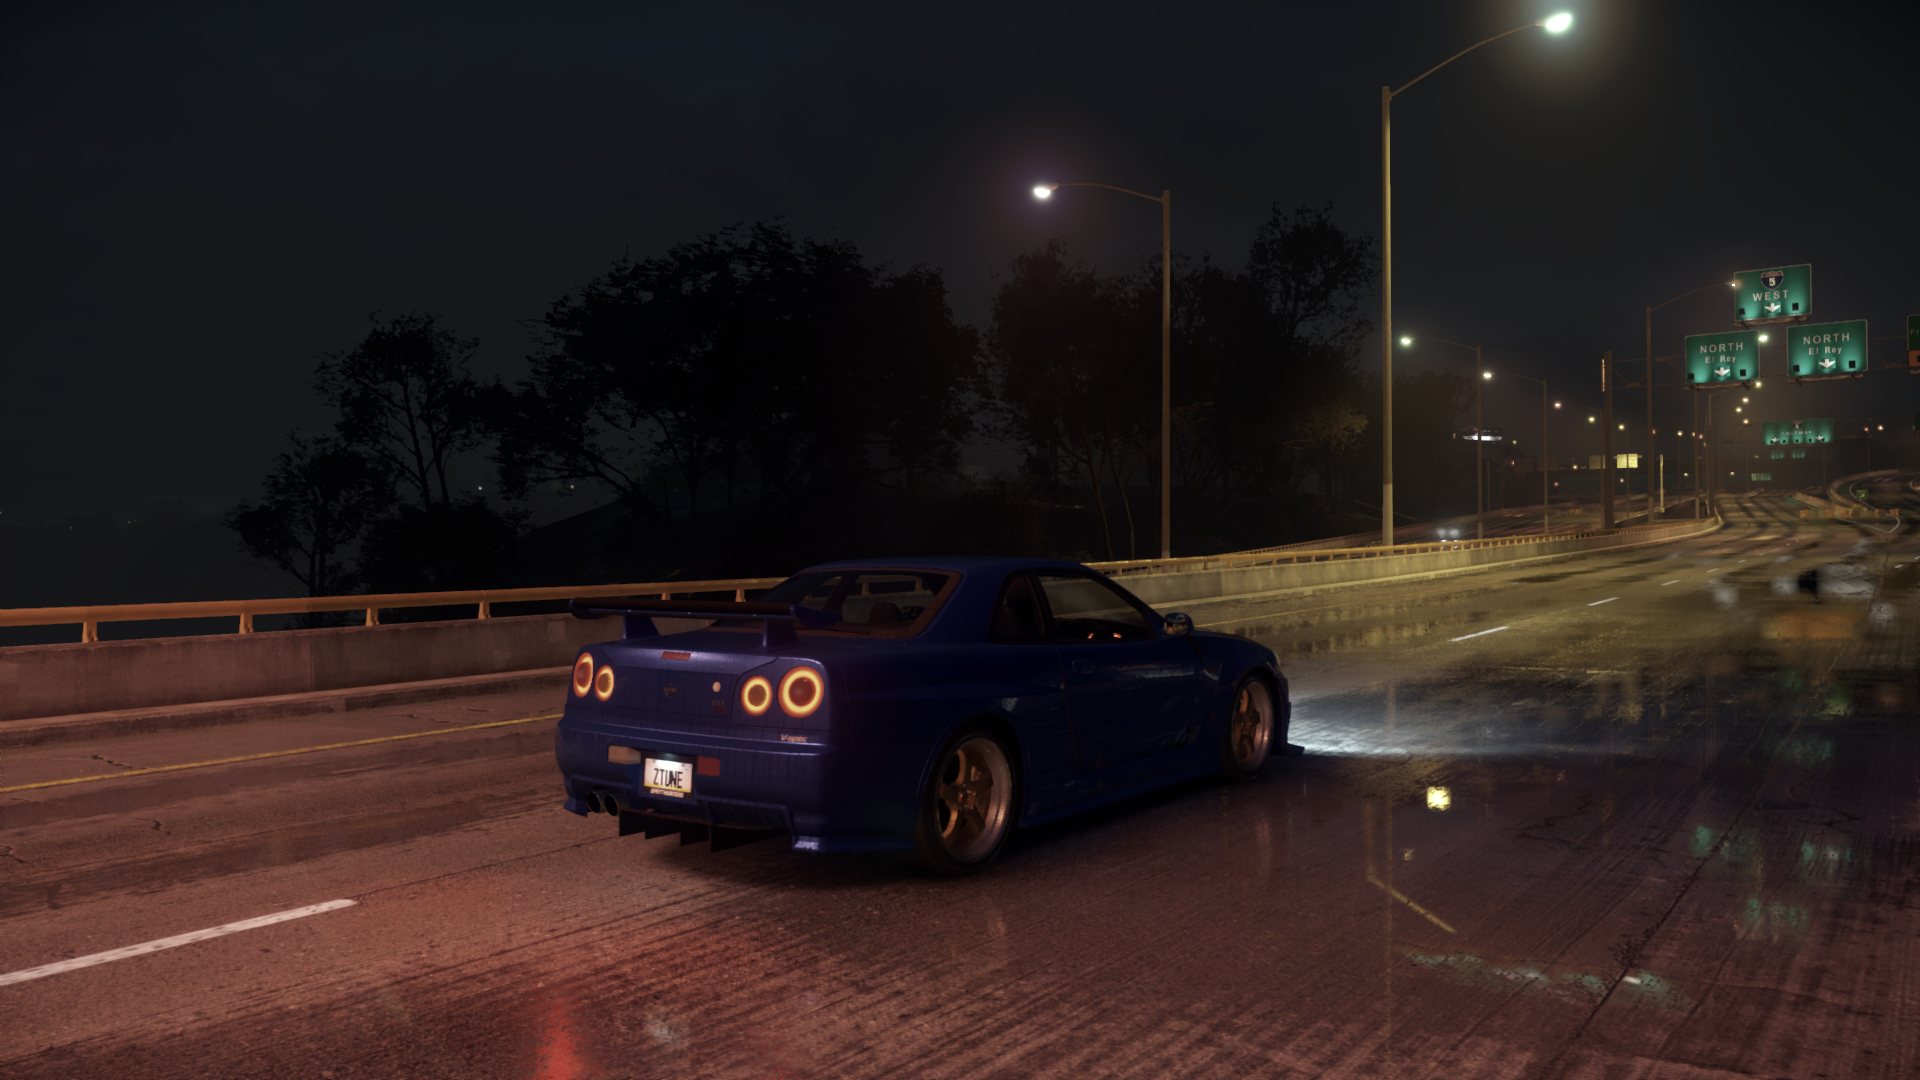 General 1920x1080 Need for Speed 2015 Need for Speed car night screen shot Nissan vehicle Nissan Skyline Nissan Skyline R34 Japanese cars video games Electronic Arts